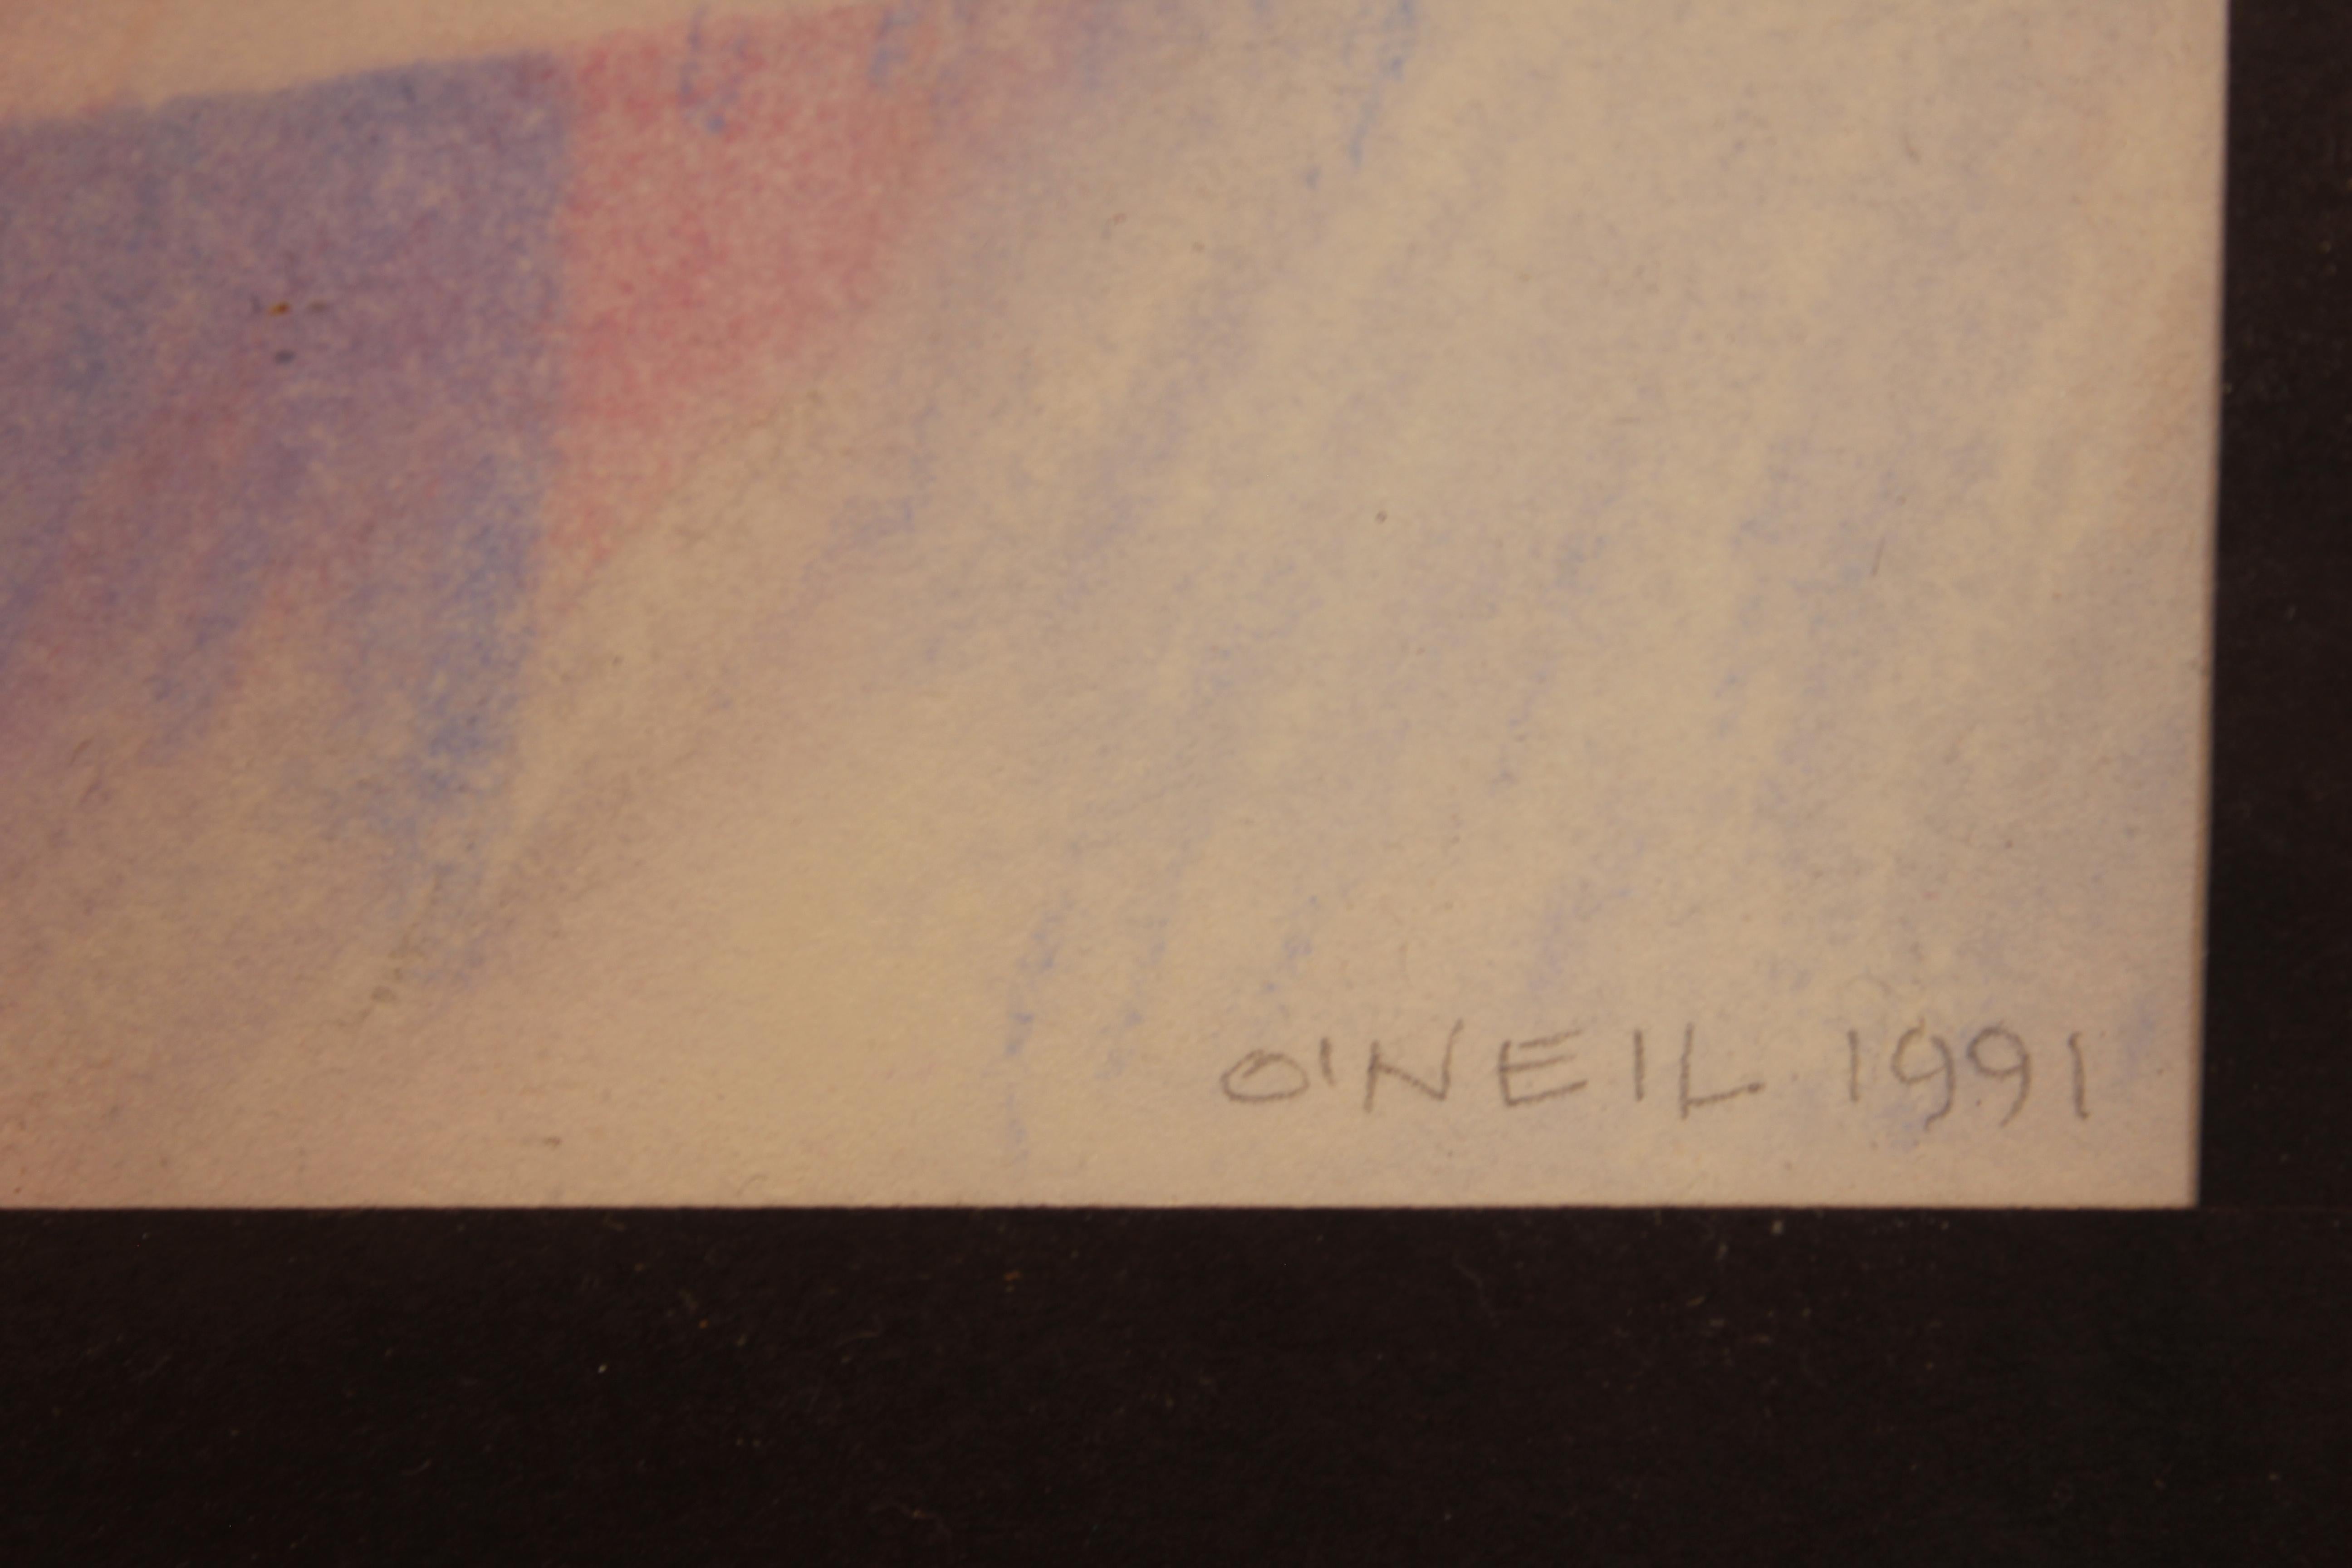 Beautiful untitled abstract pastel drawing by John O'Neil done in pastels on paper circa 1991. 
Dimensions without Frame: H 9 in. x W 15 in.

Artist Biography:
John O'Neil was born in Kansas City, Missouri in 1915. He was a painter, educator and